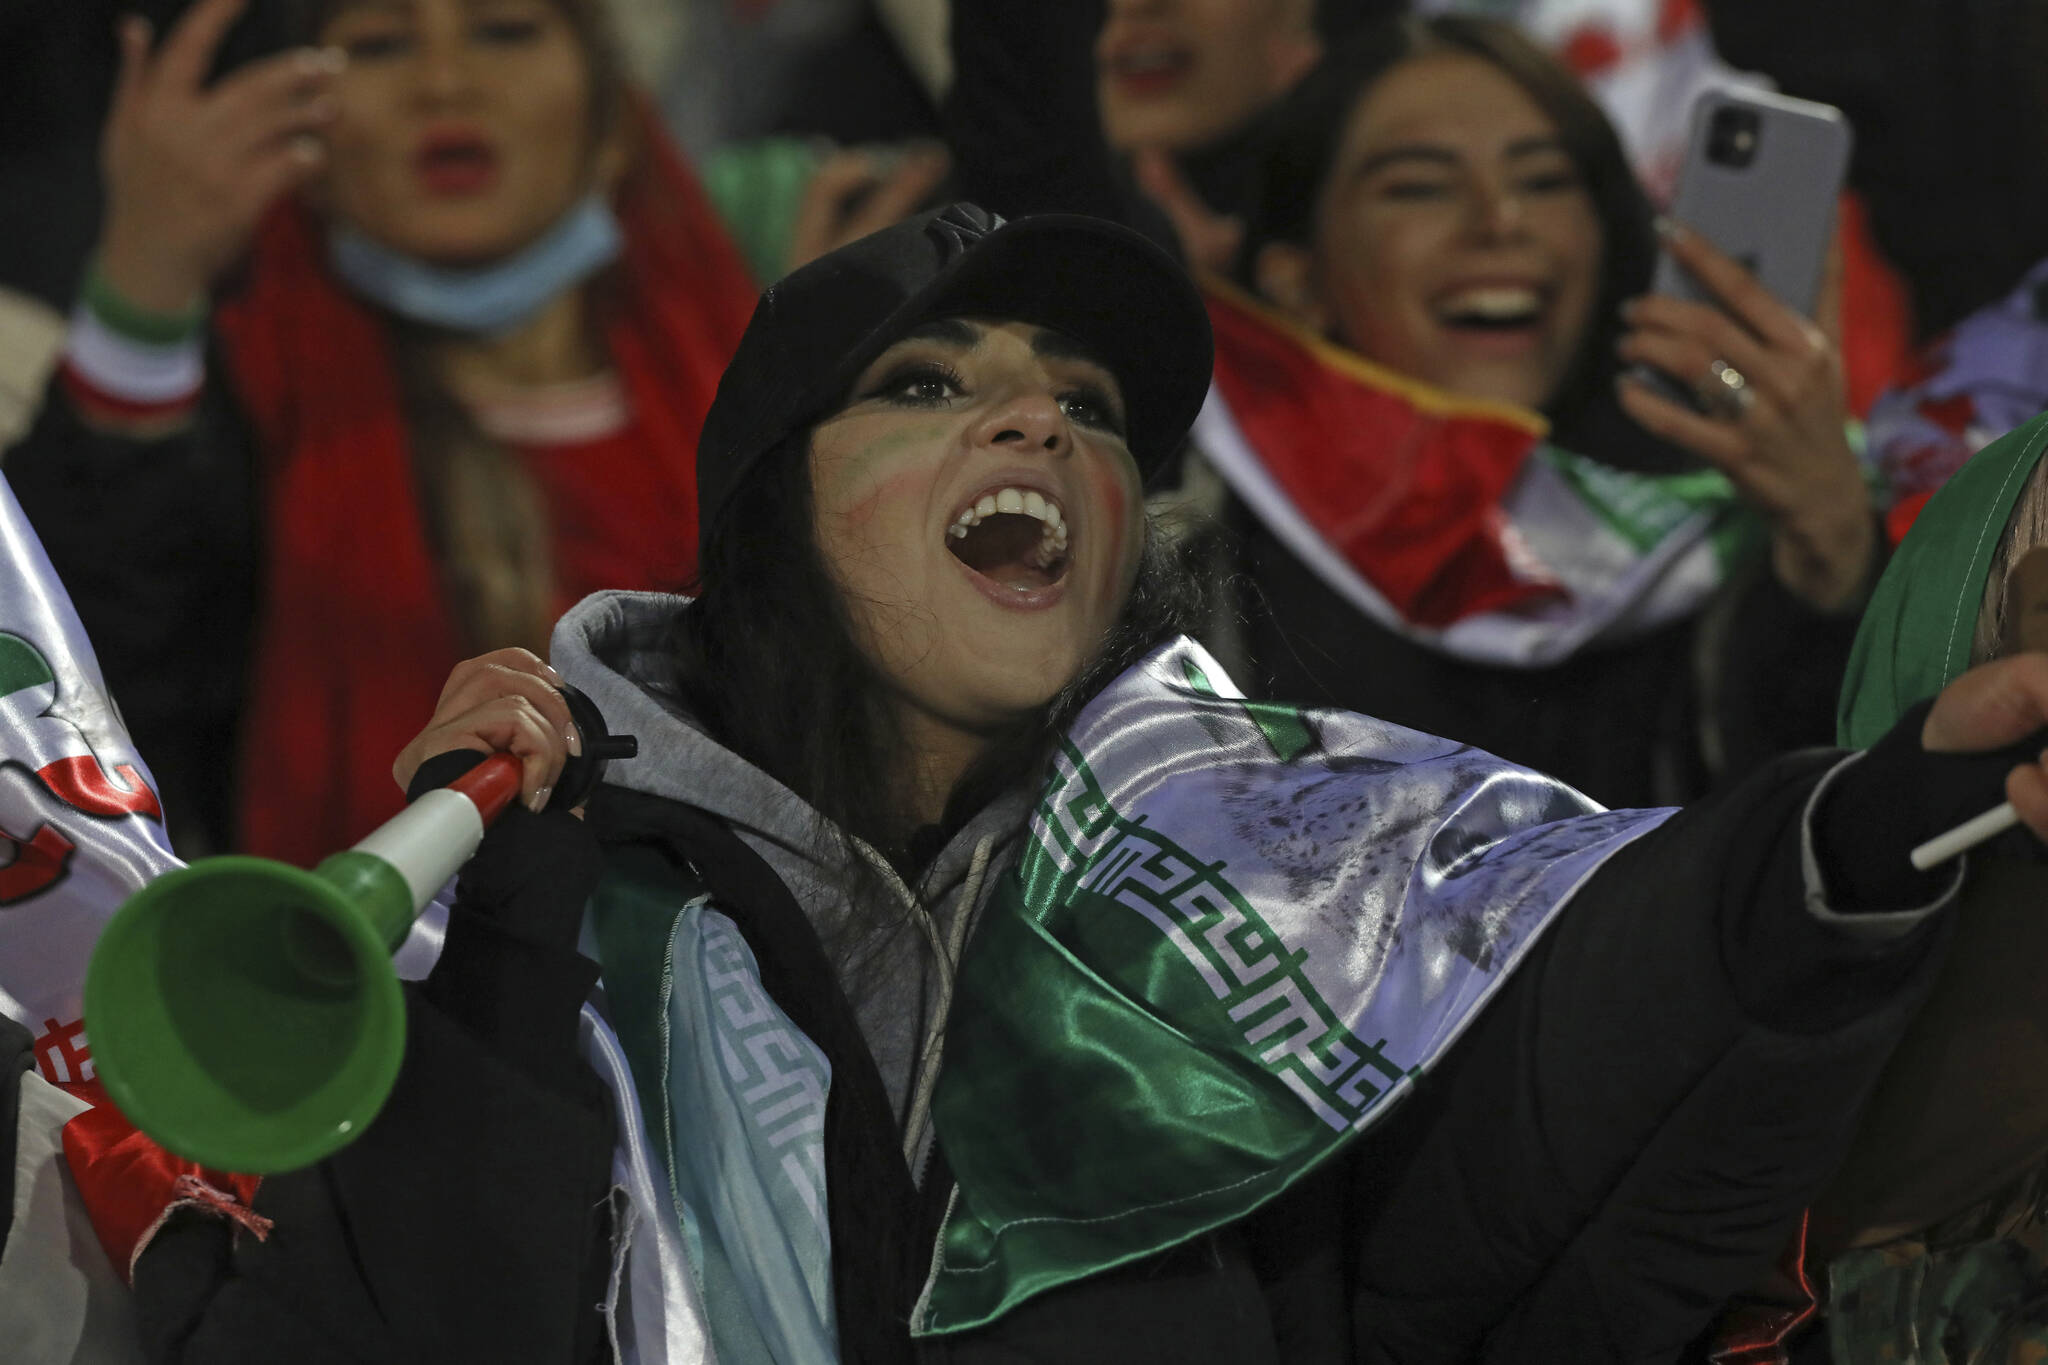 Barred from men's soccer games at home, Iranian women flock to World Cup in  Qatar